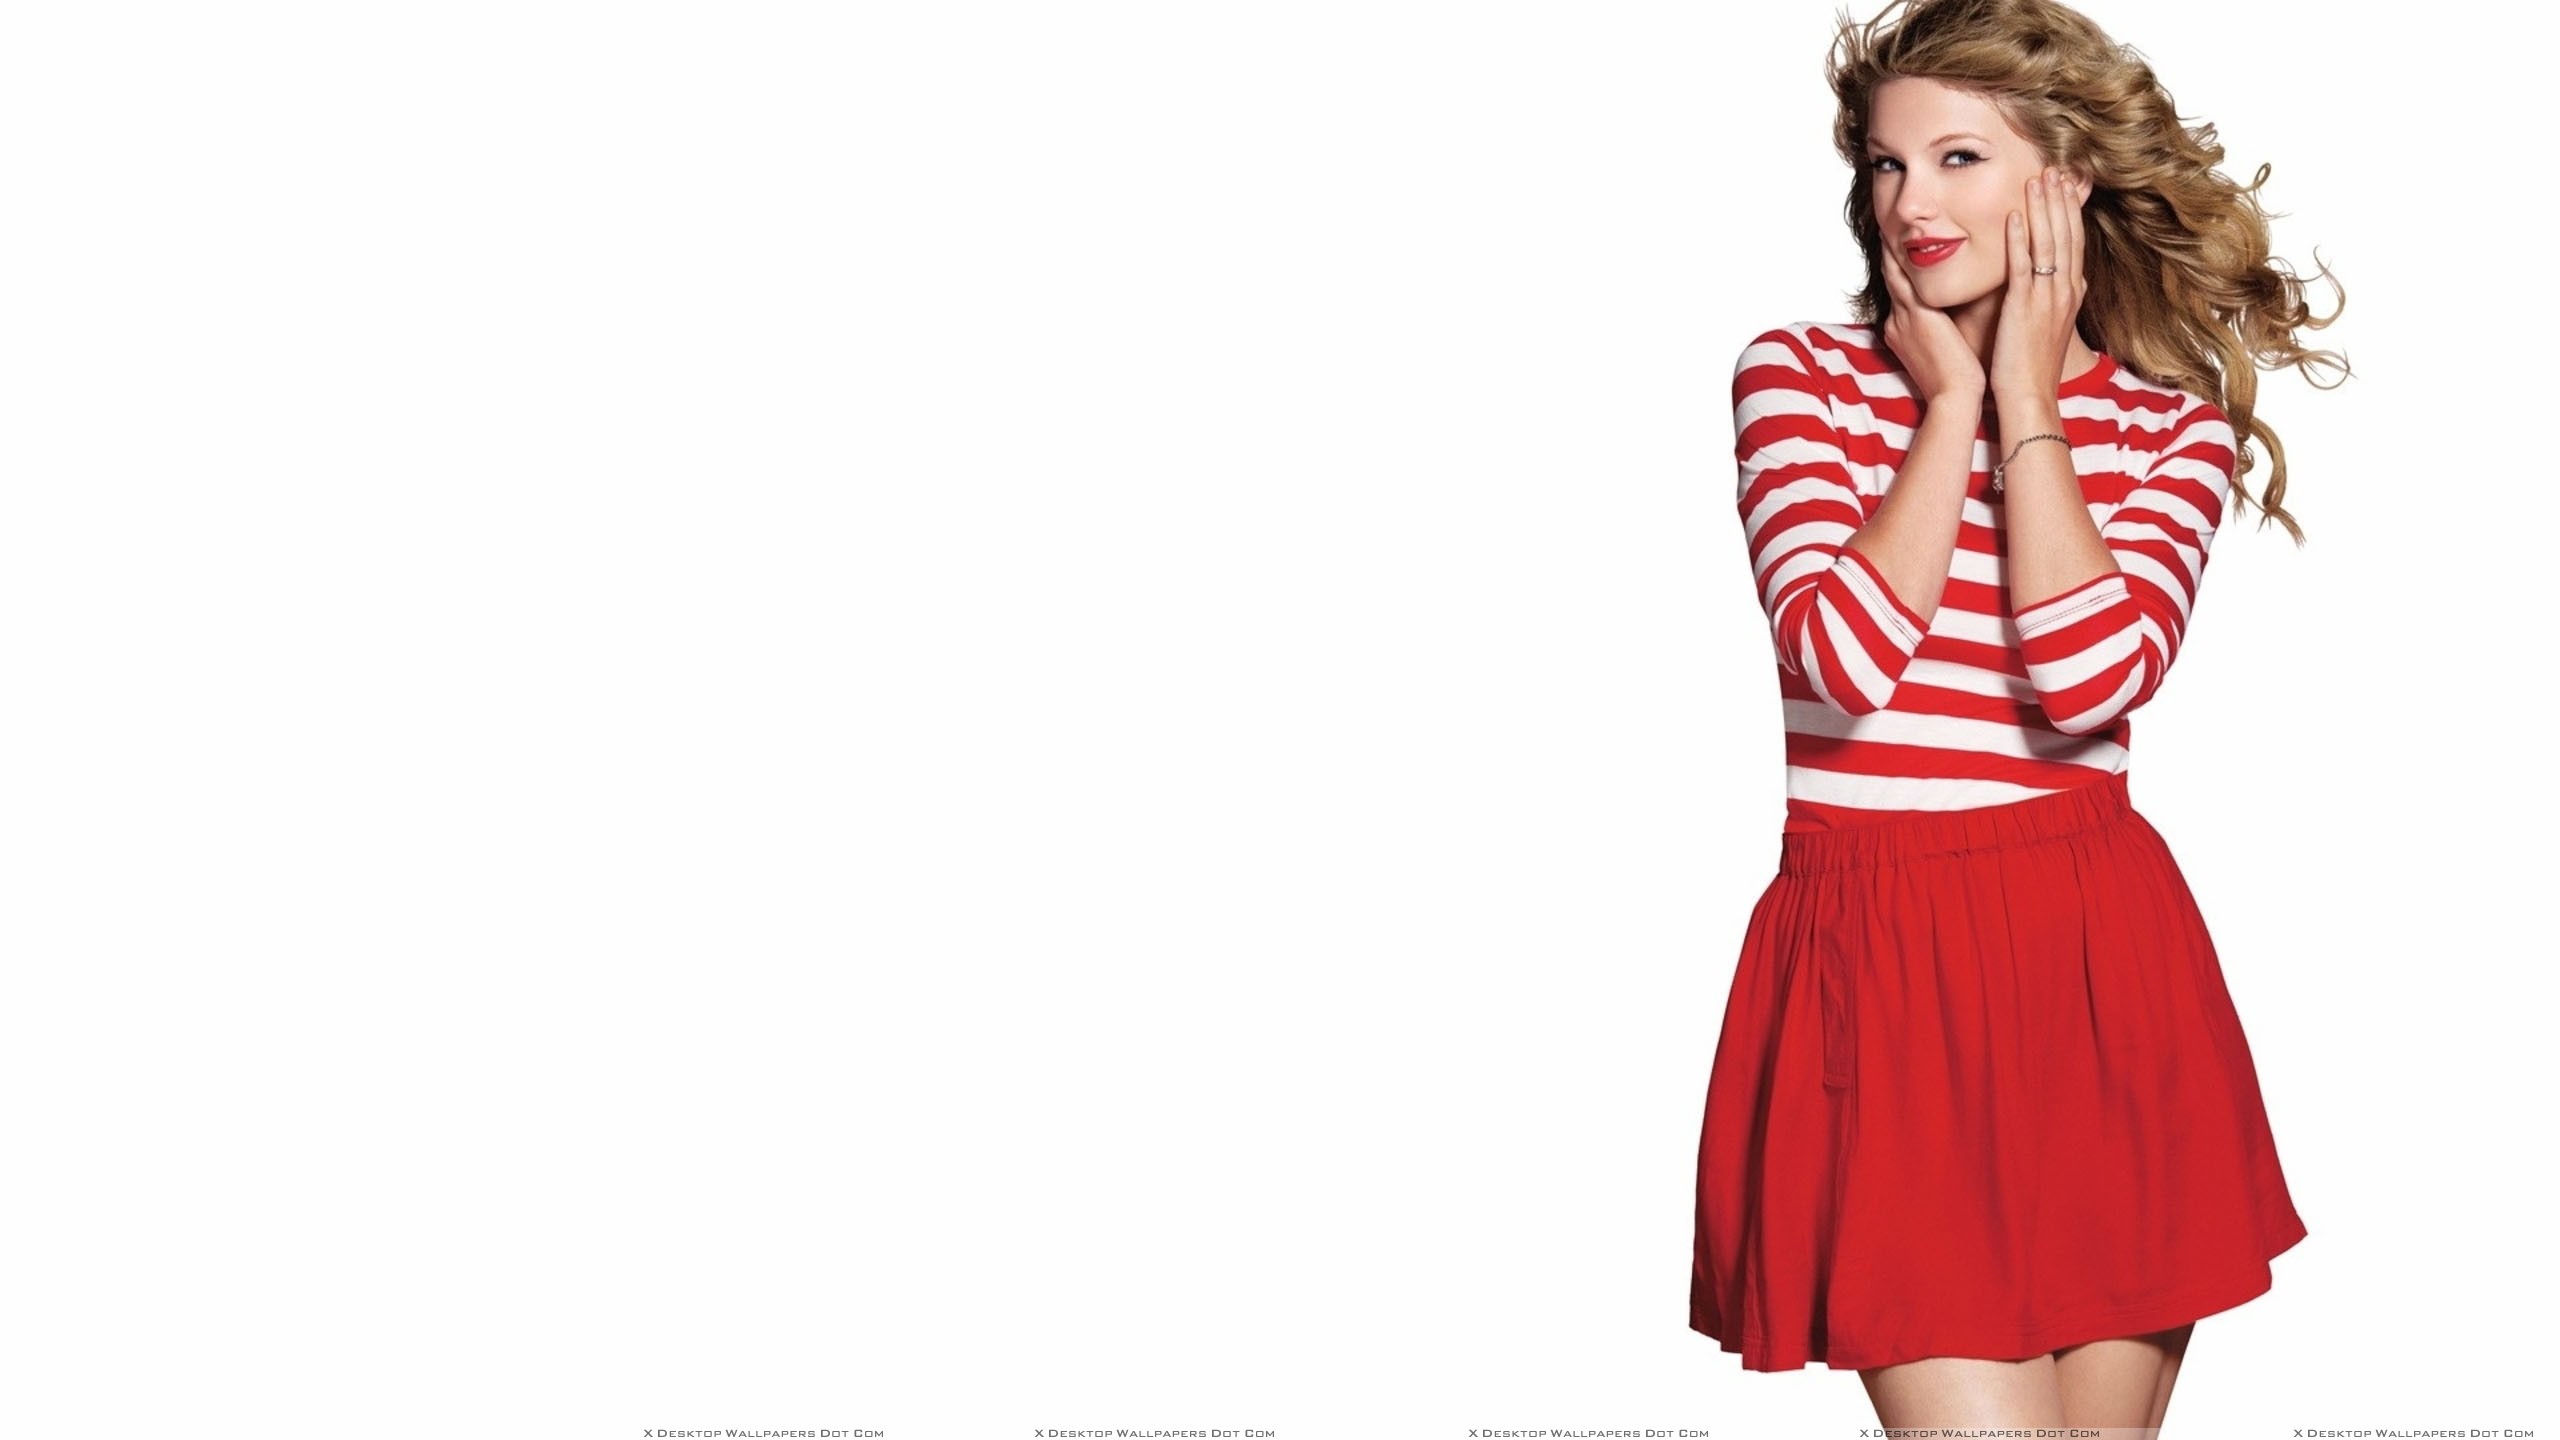 Free download Taylor Swift In Red Stripe Dress Making A Cute Pose Wallpaper [2560x1440] for your Desktop, Mobile & Tablet. Explore Taylor Swift Red Dress Wallpaper. Taylor Swift Red